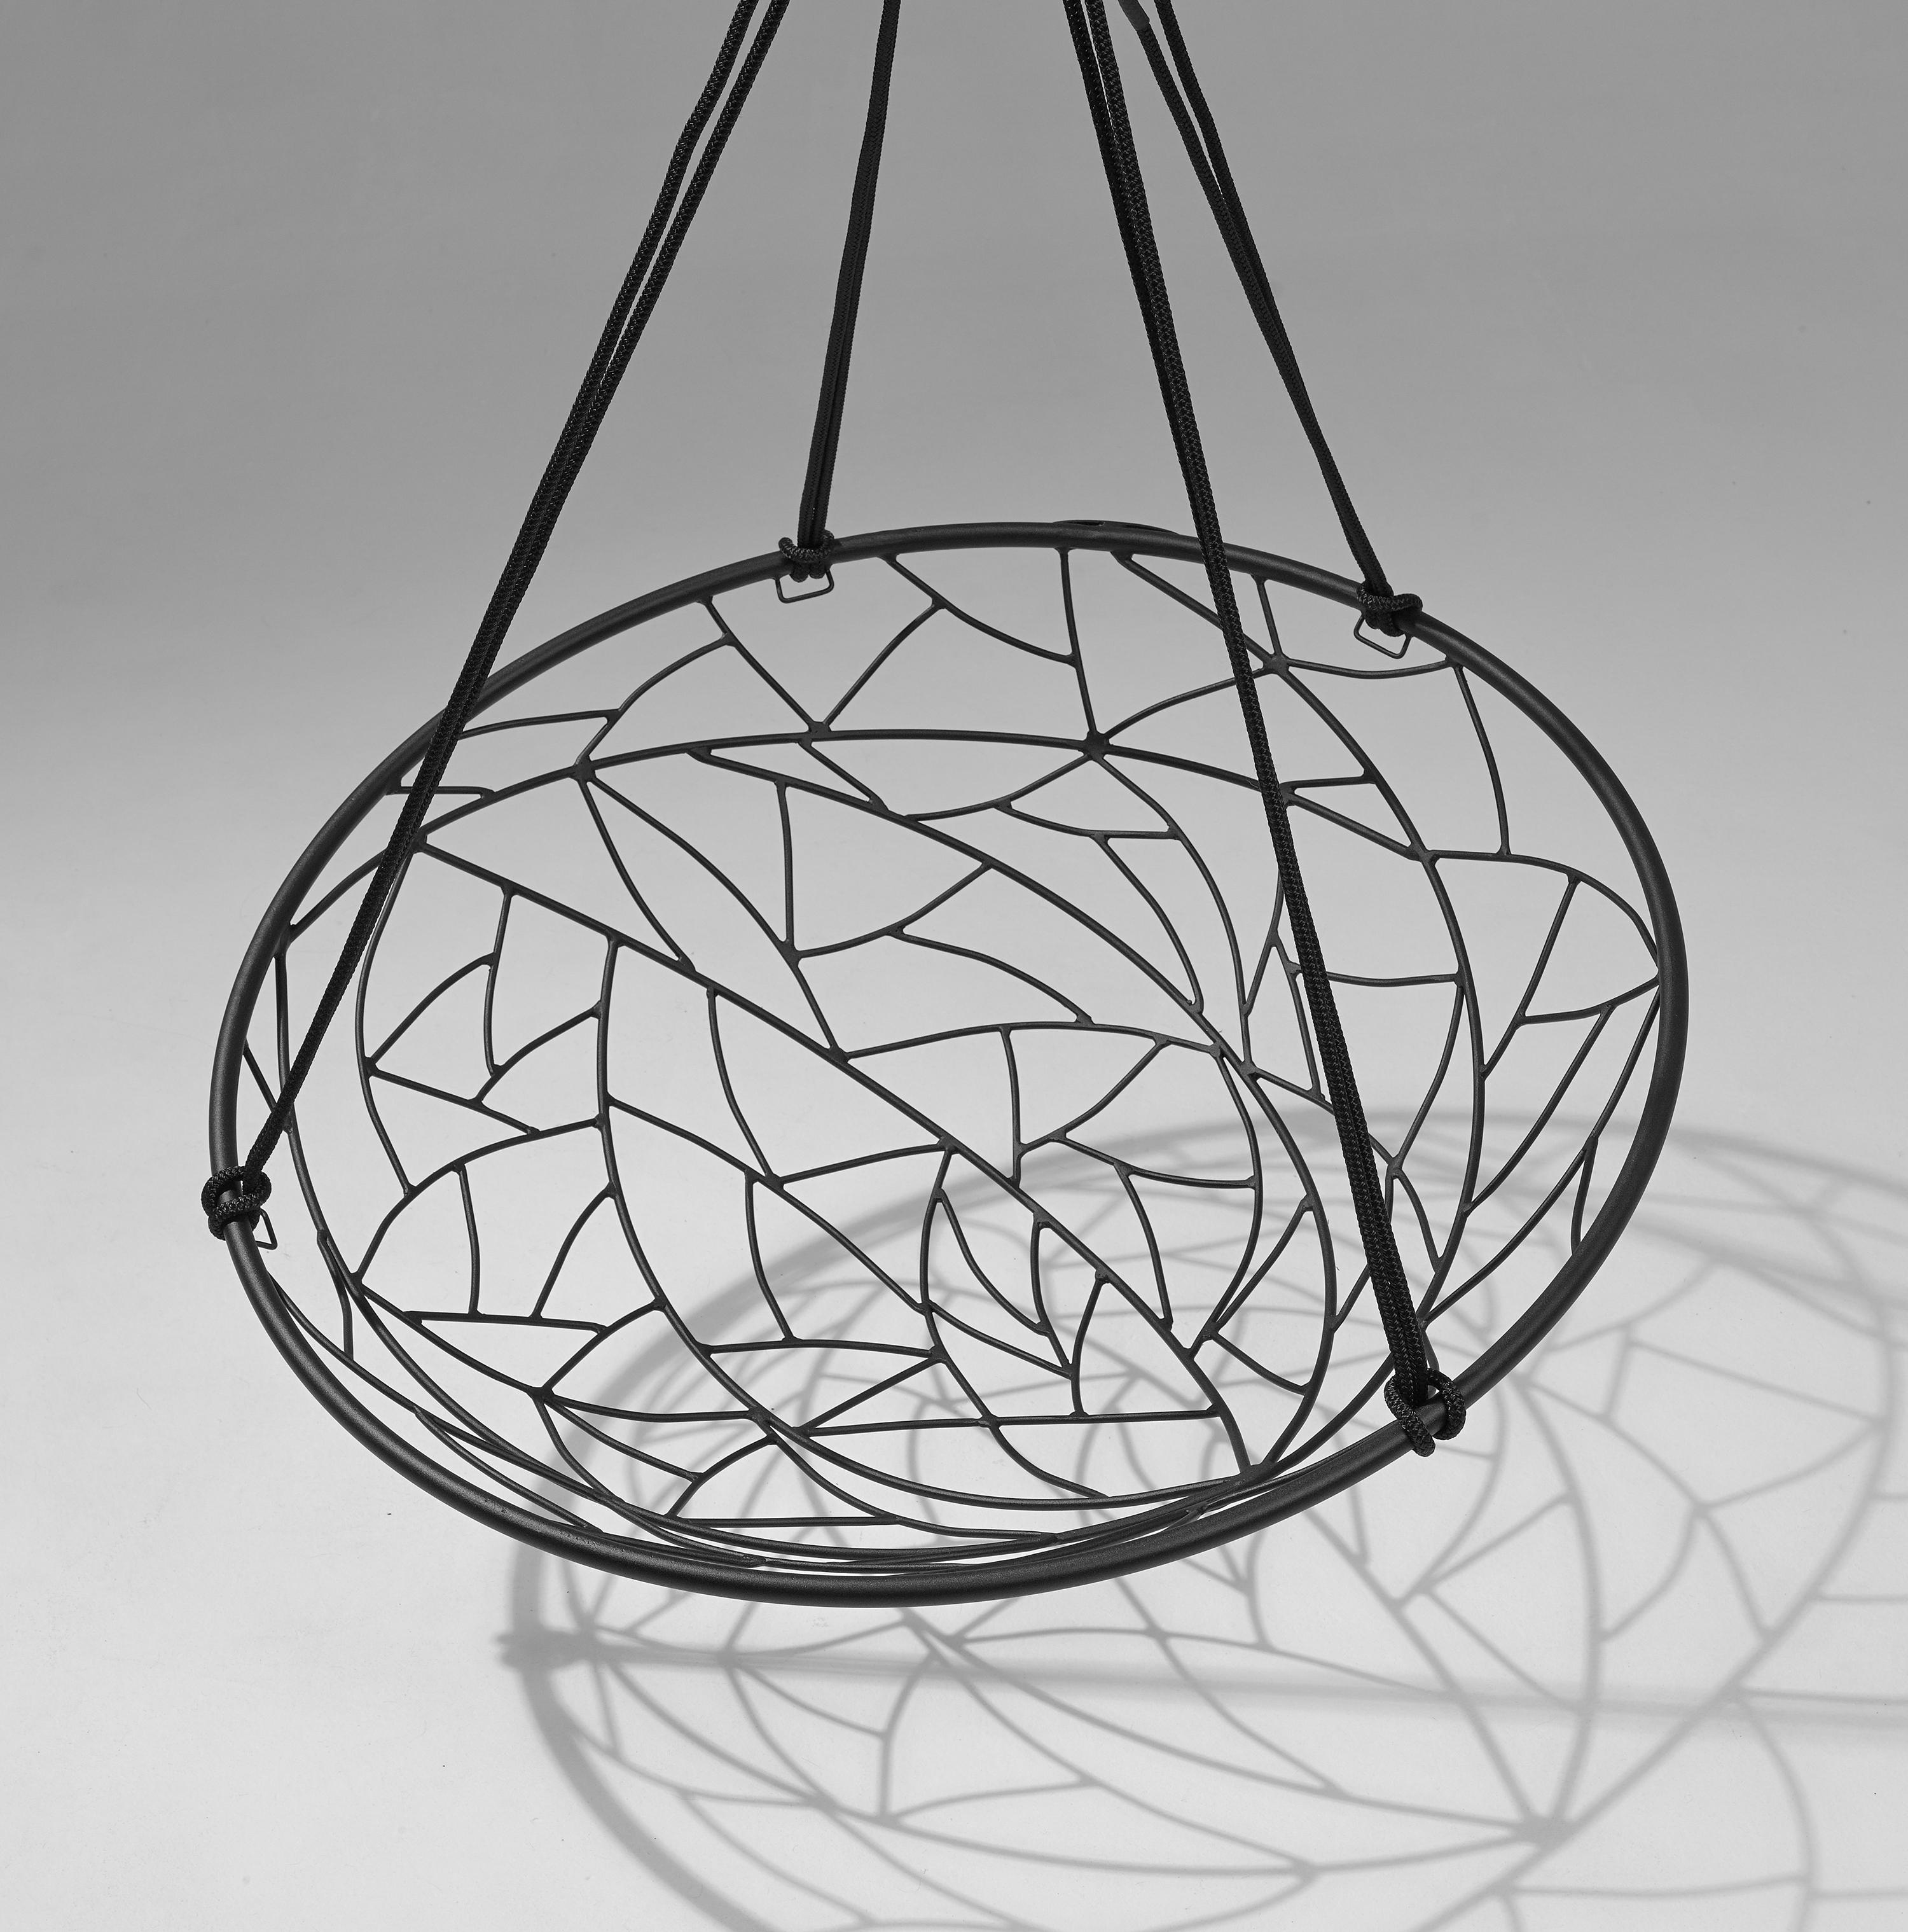 The basket twig hanging swing chairs’ round shape creates a cozy feel. It is simple and striking in its visual appeal.
The pattern detail is inspired by nature and reminiscent of the veins in leaves, tree branches intersecting, the patterns in